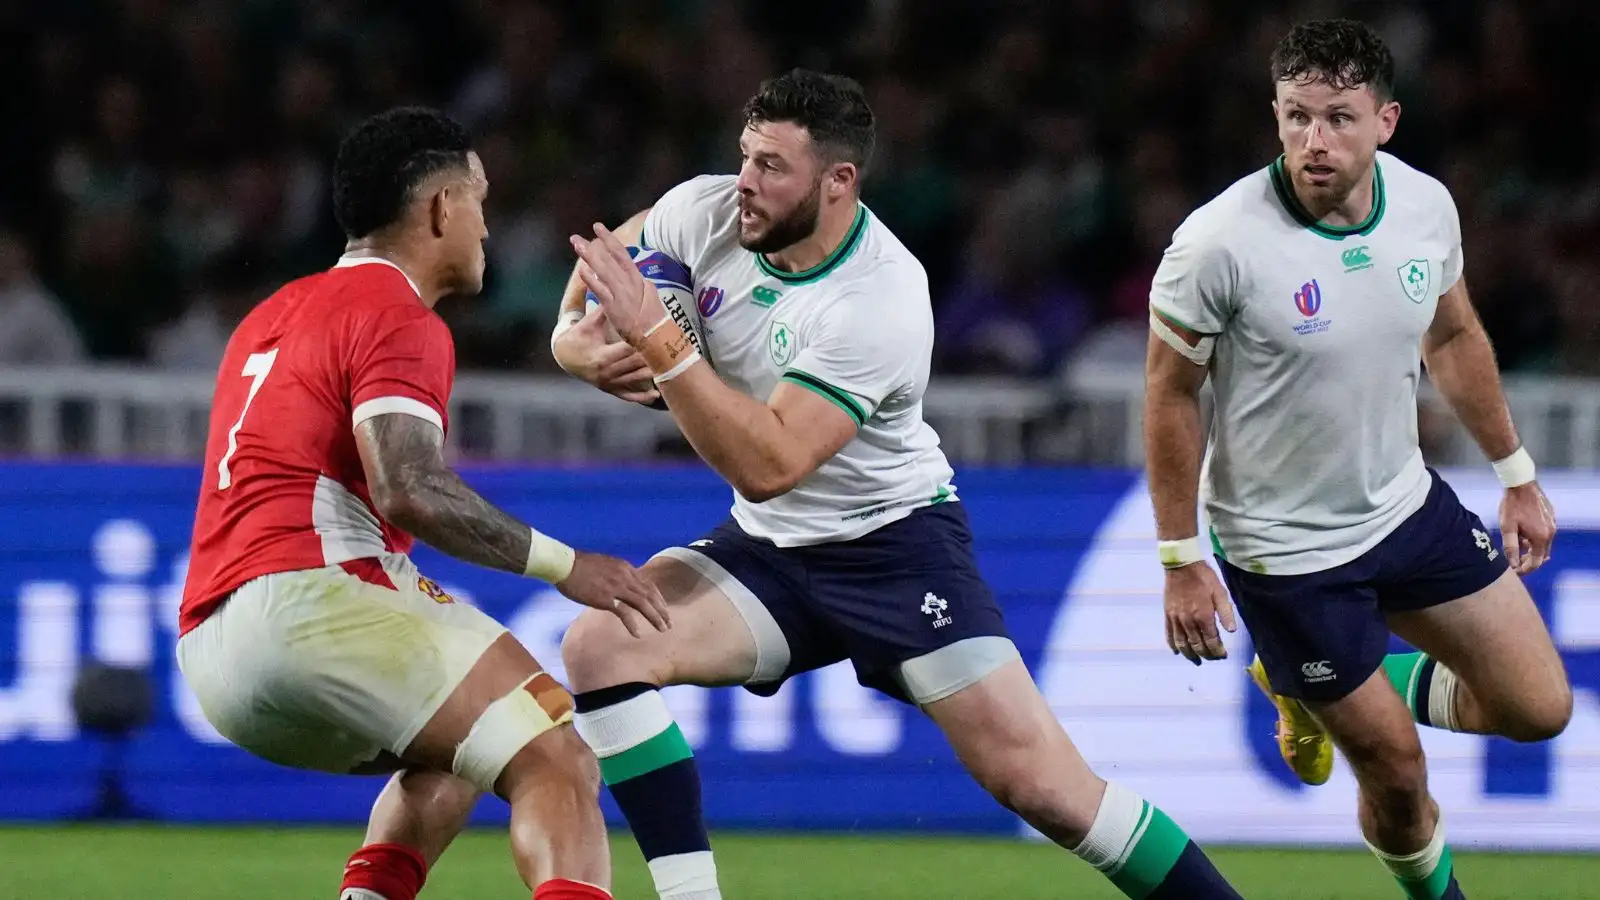 Ireland centre Robbie Henshaw attempts to run past Tonga's Sione Havili Talitui during the Rugby World Cup Pool B match between Ireland and Tonga at the State de la Beaujoire in Nantes